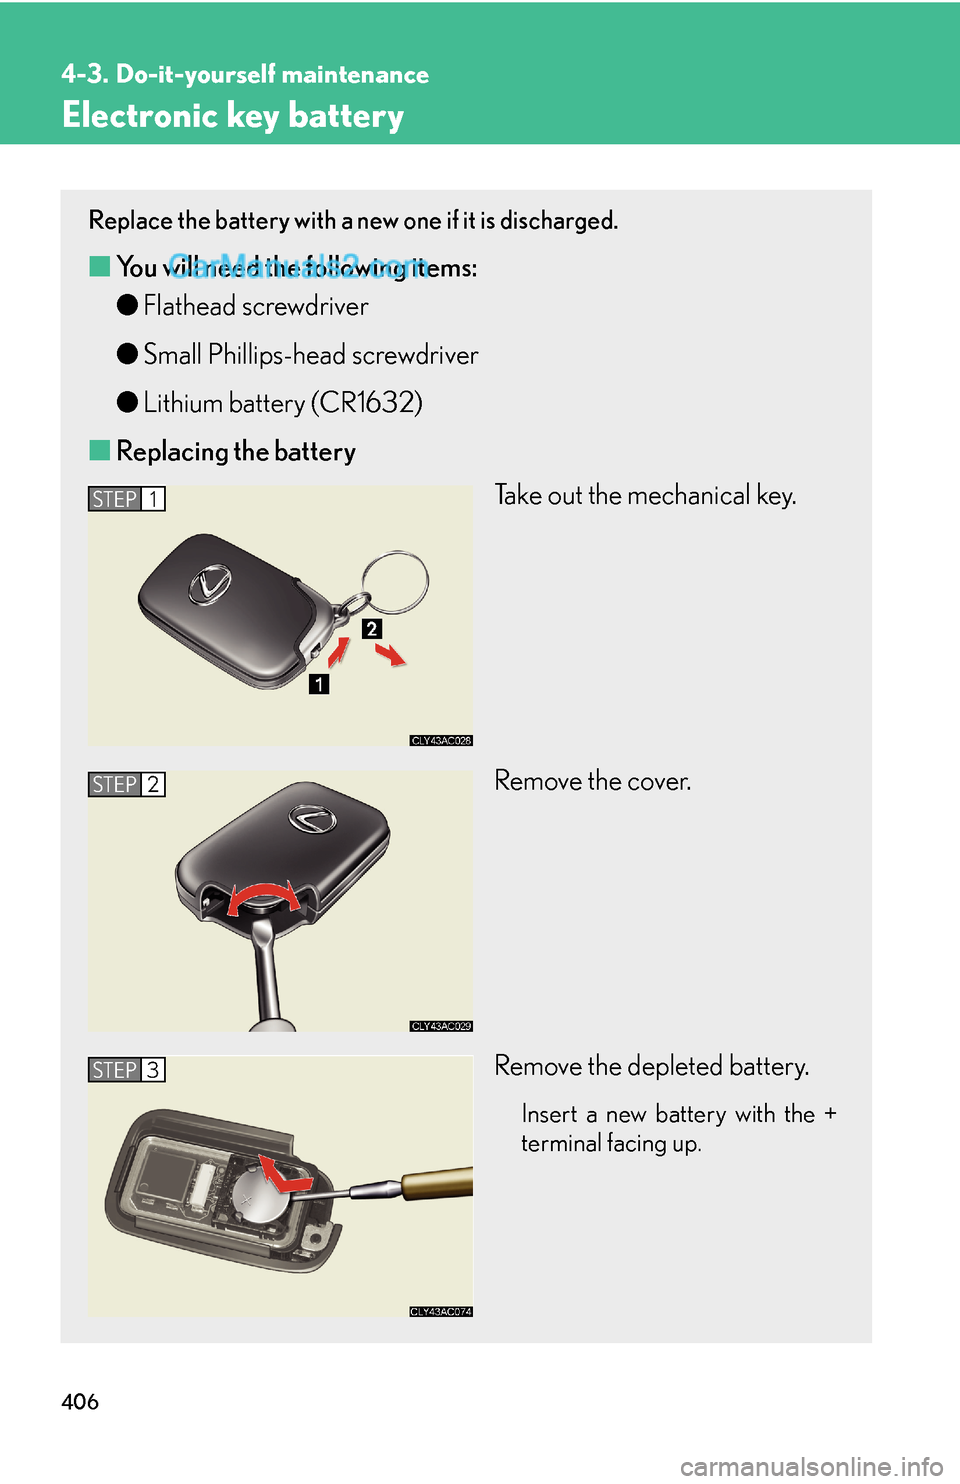 Lexus ES350 2010  Do-It-Yourself Maintenance 406
4-3. Do-it-yourself maintenance
Electronic key battery
Replace the battery with a new one if it is discharged.
■You will need the following items:
●Flathead screwdriver
●Small Phillips-head 